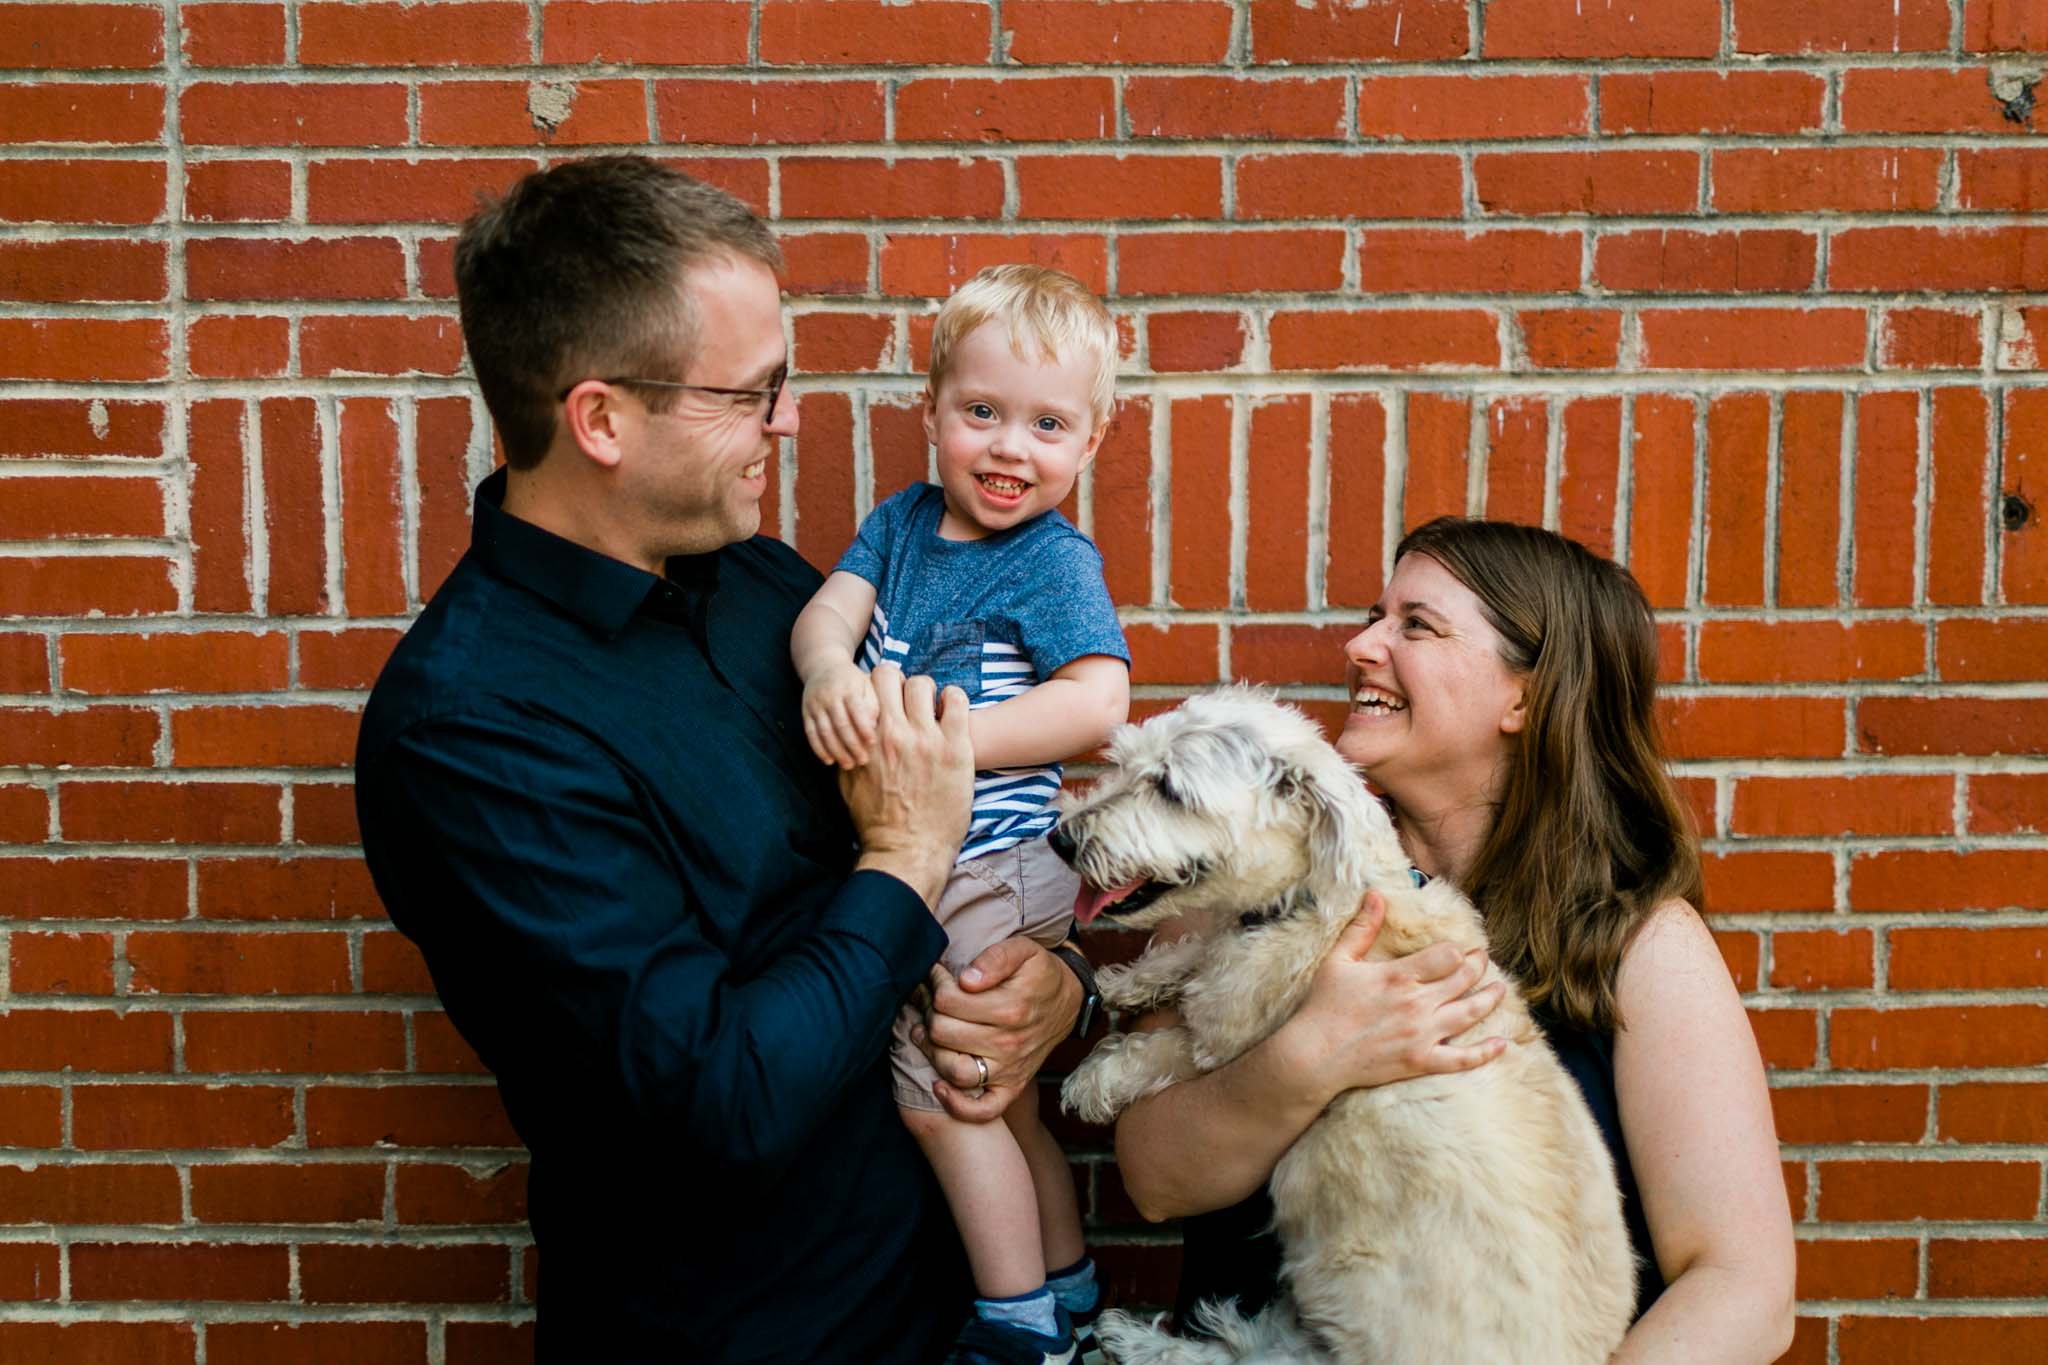 Cute family photo outside against brick wall | Durham Family Photographer | By G. Lin Photography